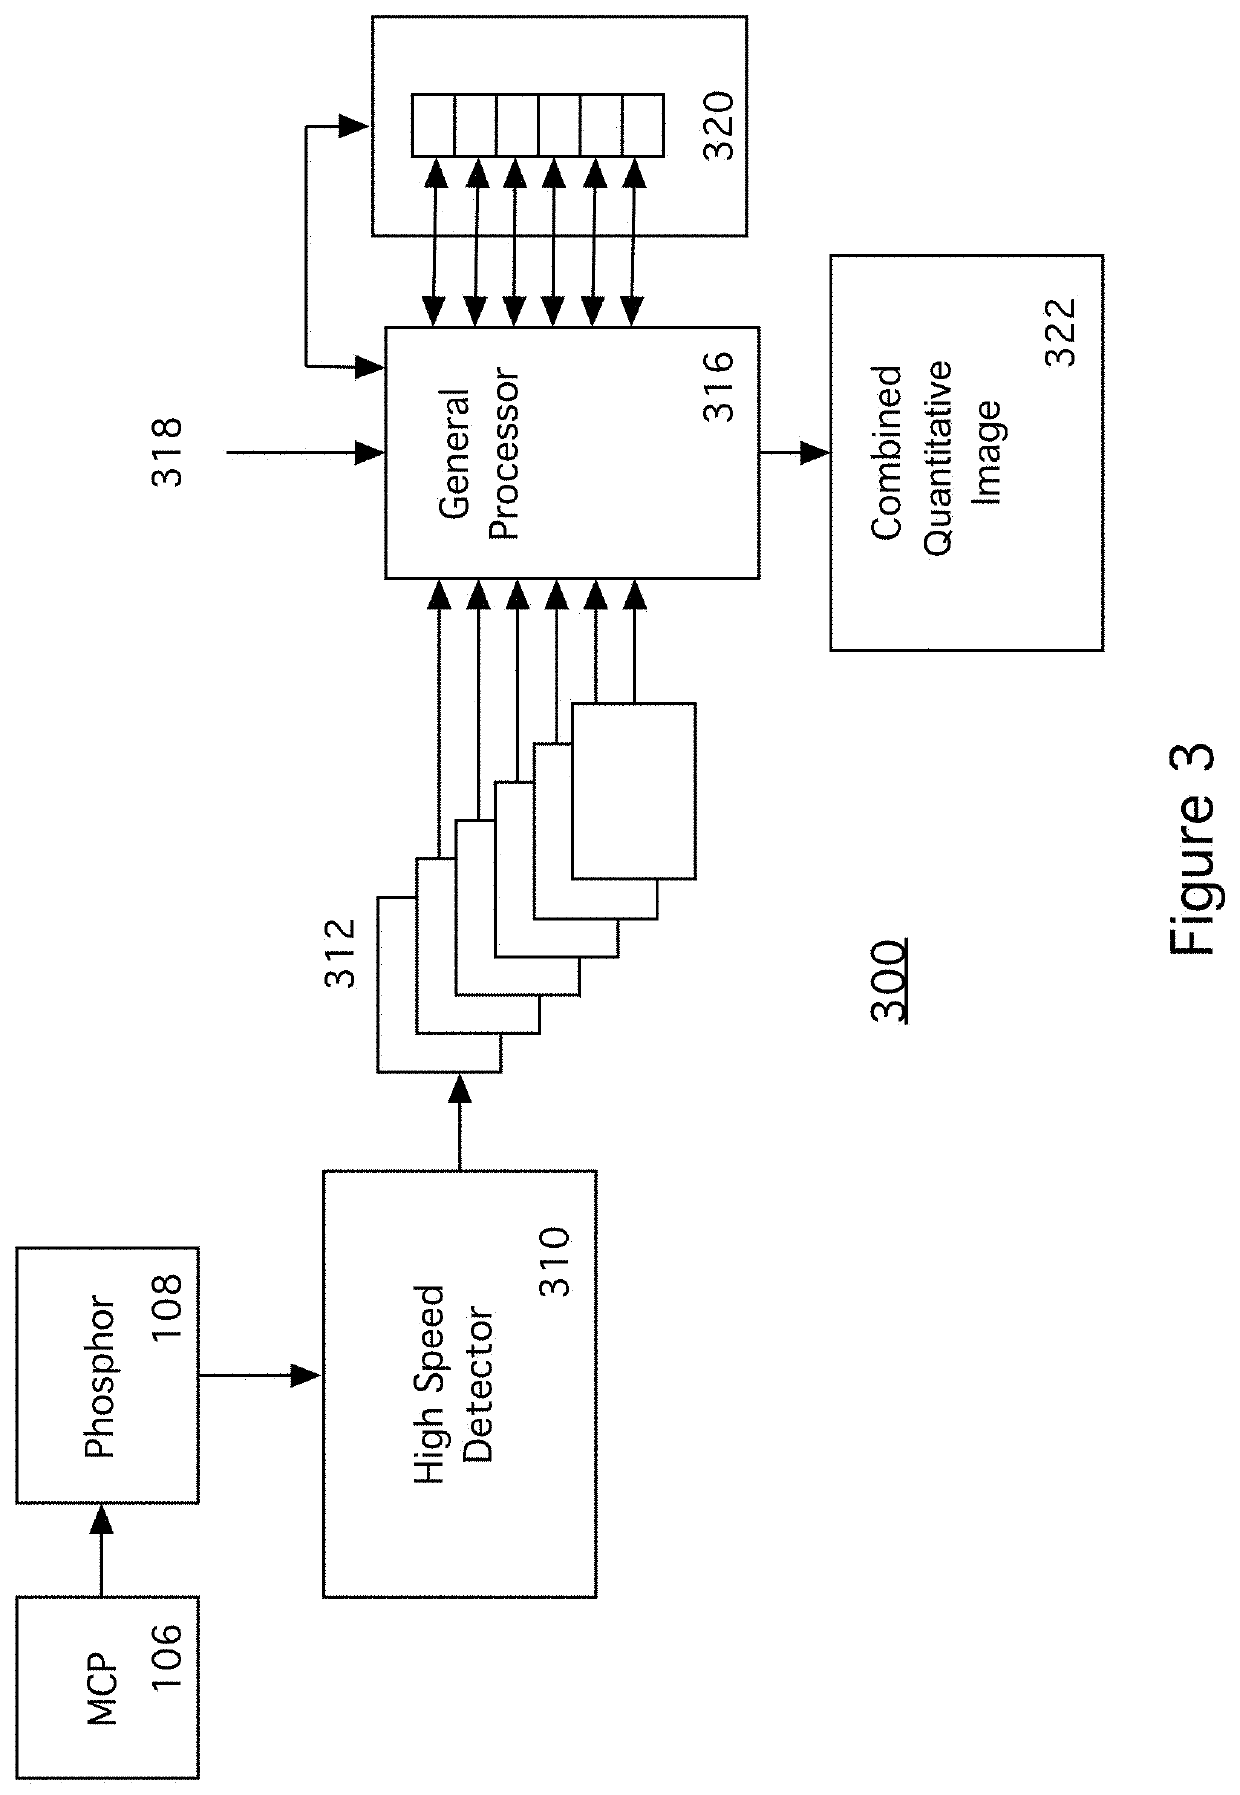 High Speed Two-Dimensional Event Detection and Imaging Using an Analog Interface and a Massively Parallel Processor